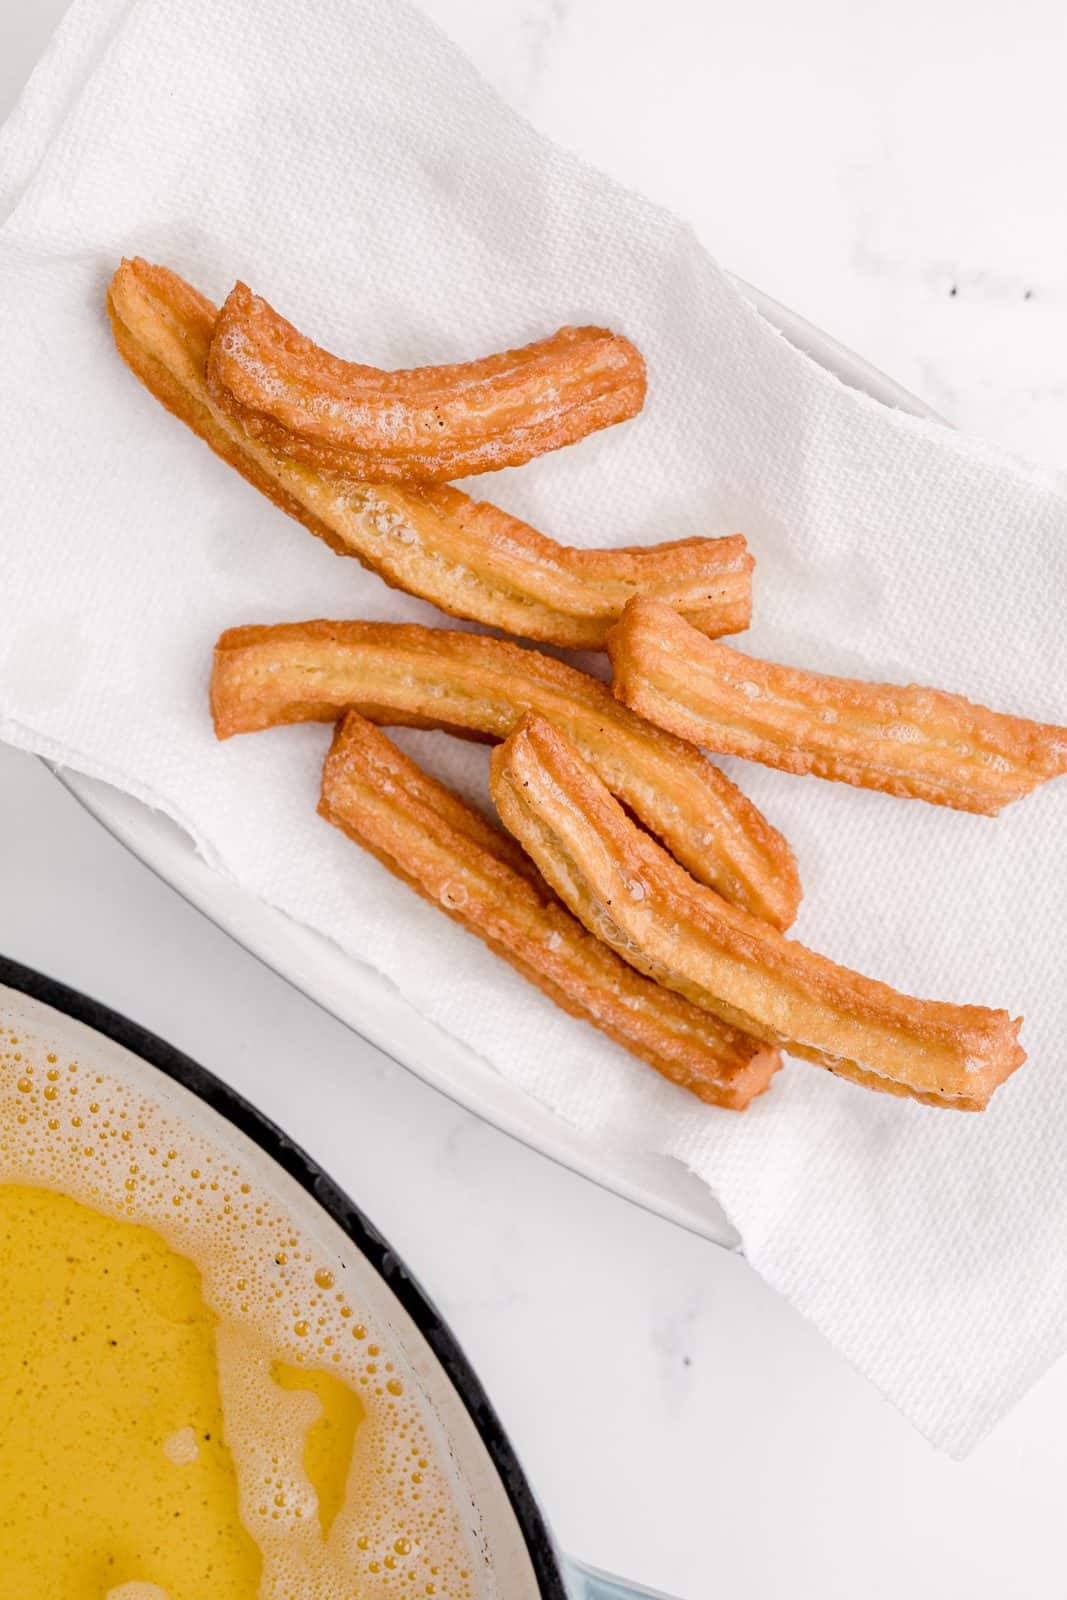 Churros removed to quickly drain on paper towels.